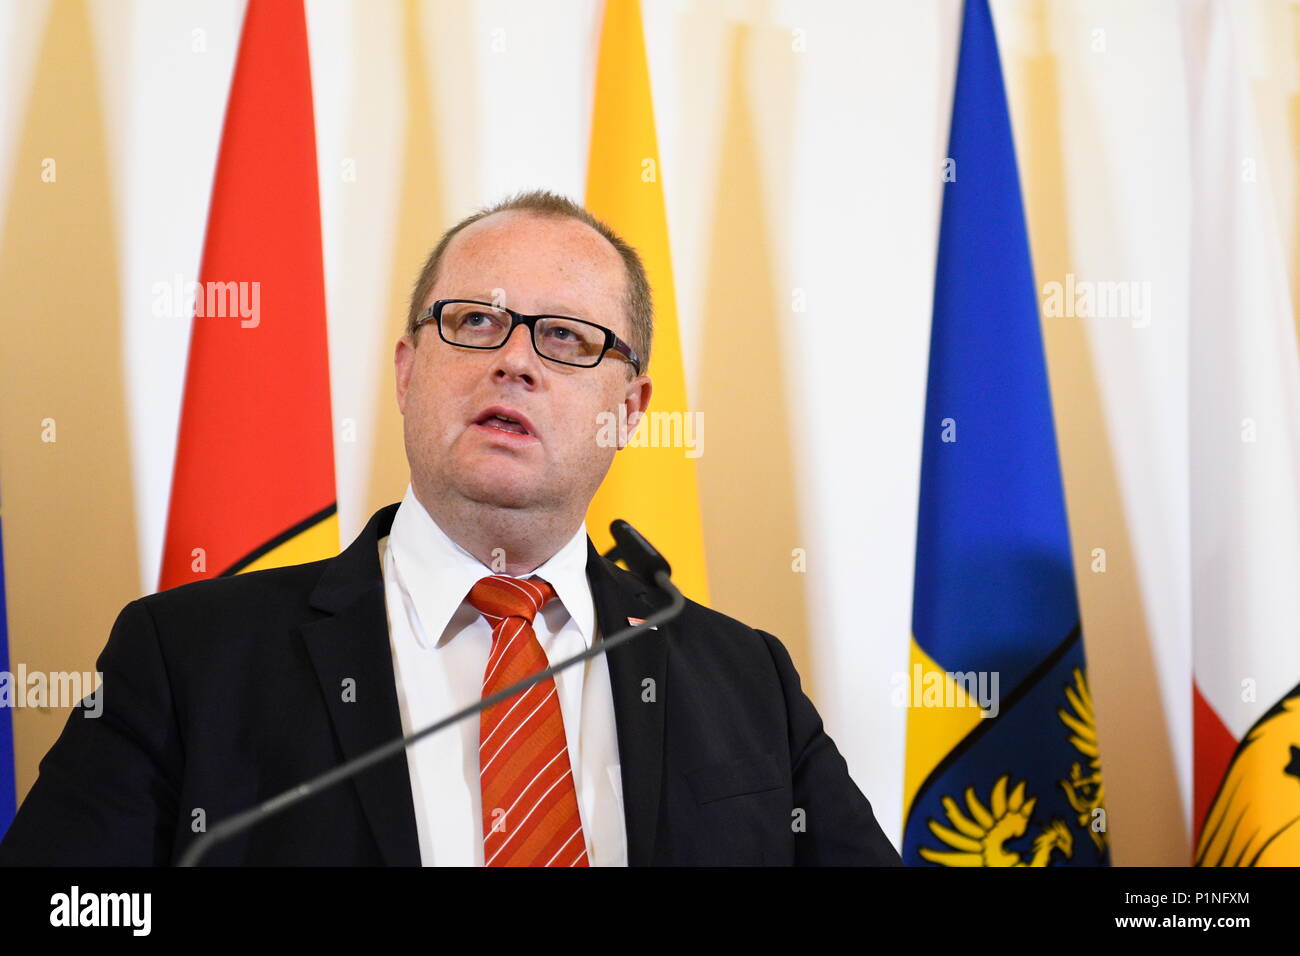 Vienna, Austria. June 13, 2018. Ministerial Council of the Austrian Federal Government in the Federal Chancellery in Vienna.  Picture shows State Secretary in the Federal Ministry of Finance, Hubert Fuchs.    Credit: Franz Perc / Alamy Live News Stock Photo